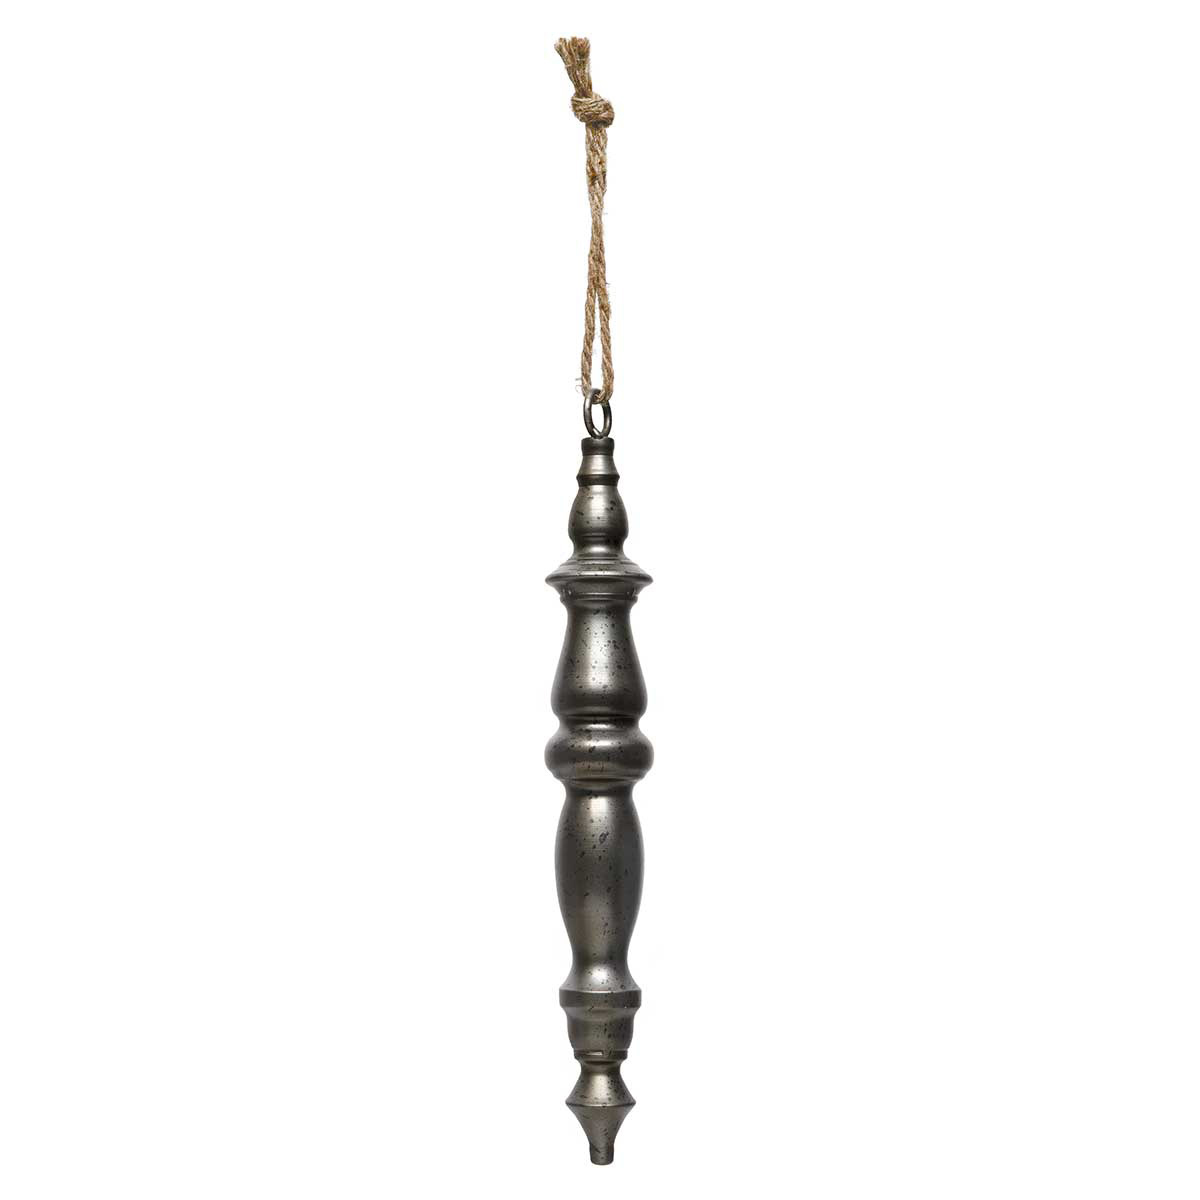 ORNAMENT HANGING FINIAL LARGE 2.5IN X 16IN PEWTER METAL